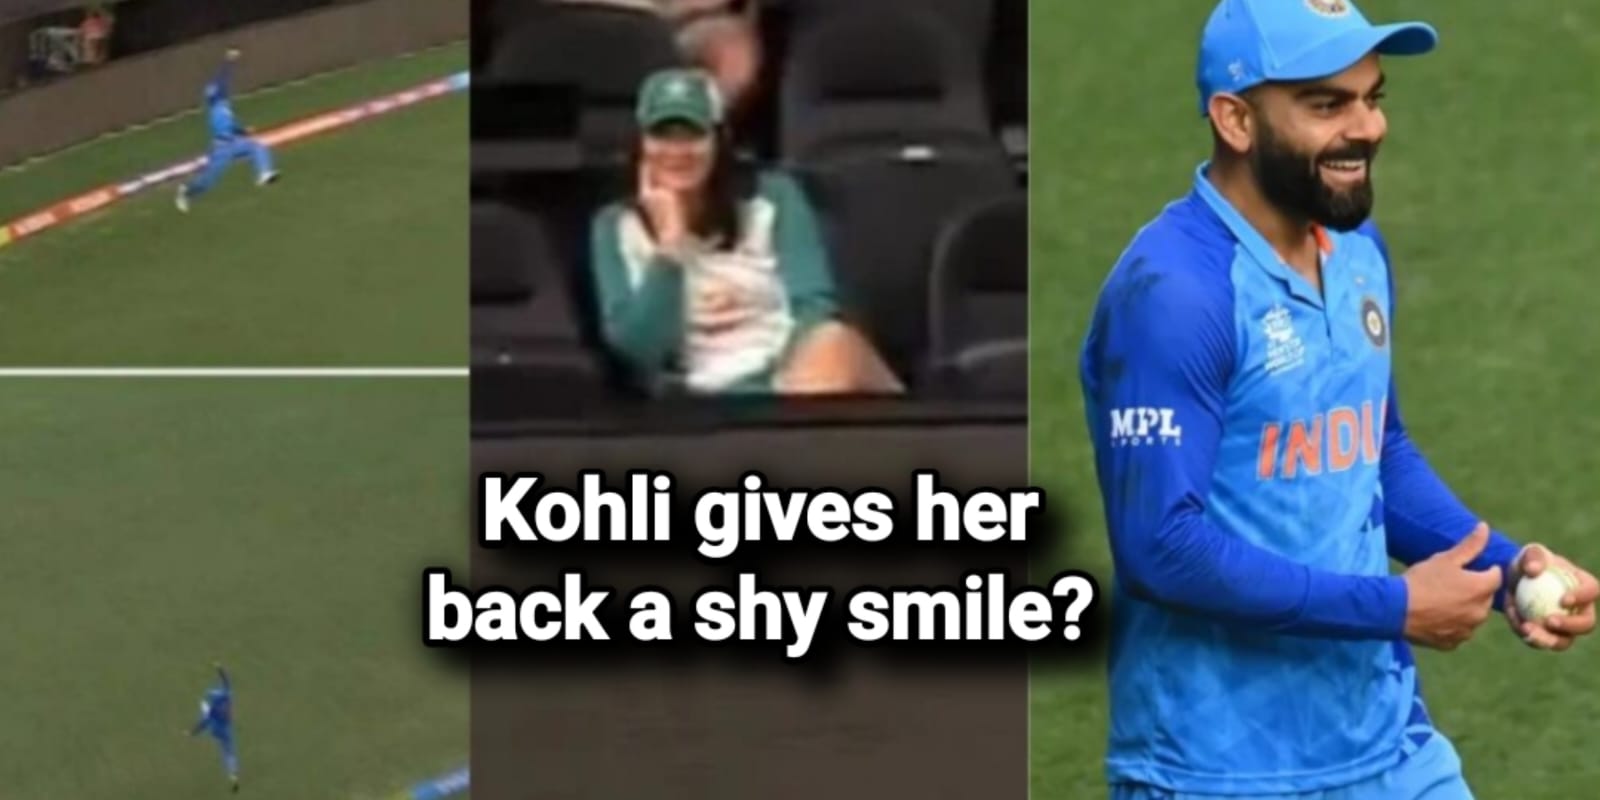 Australian lady becomes Fan of Virat Kohli after this outstanding catch